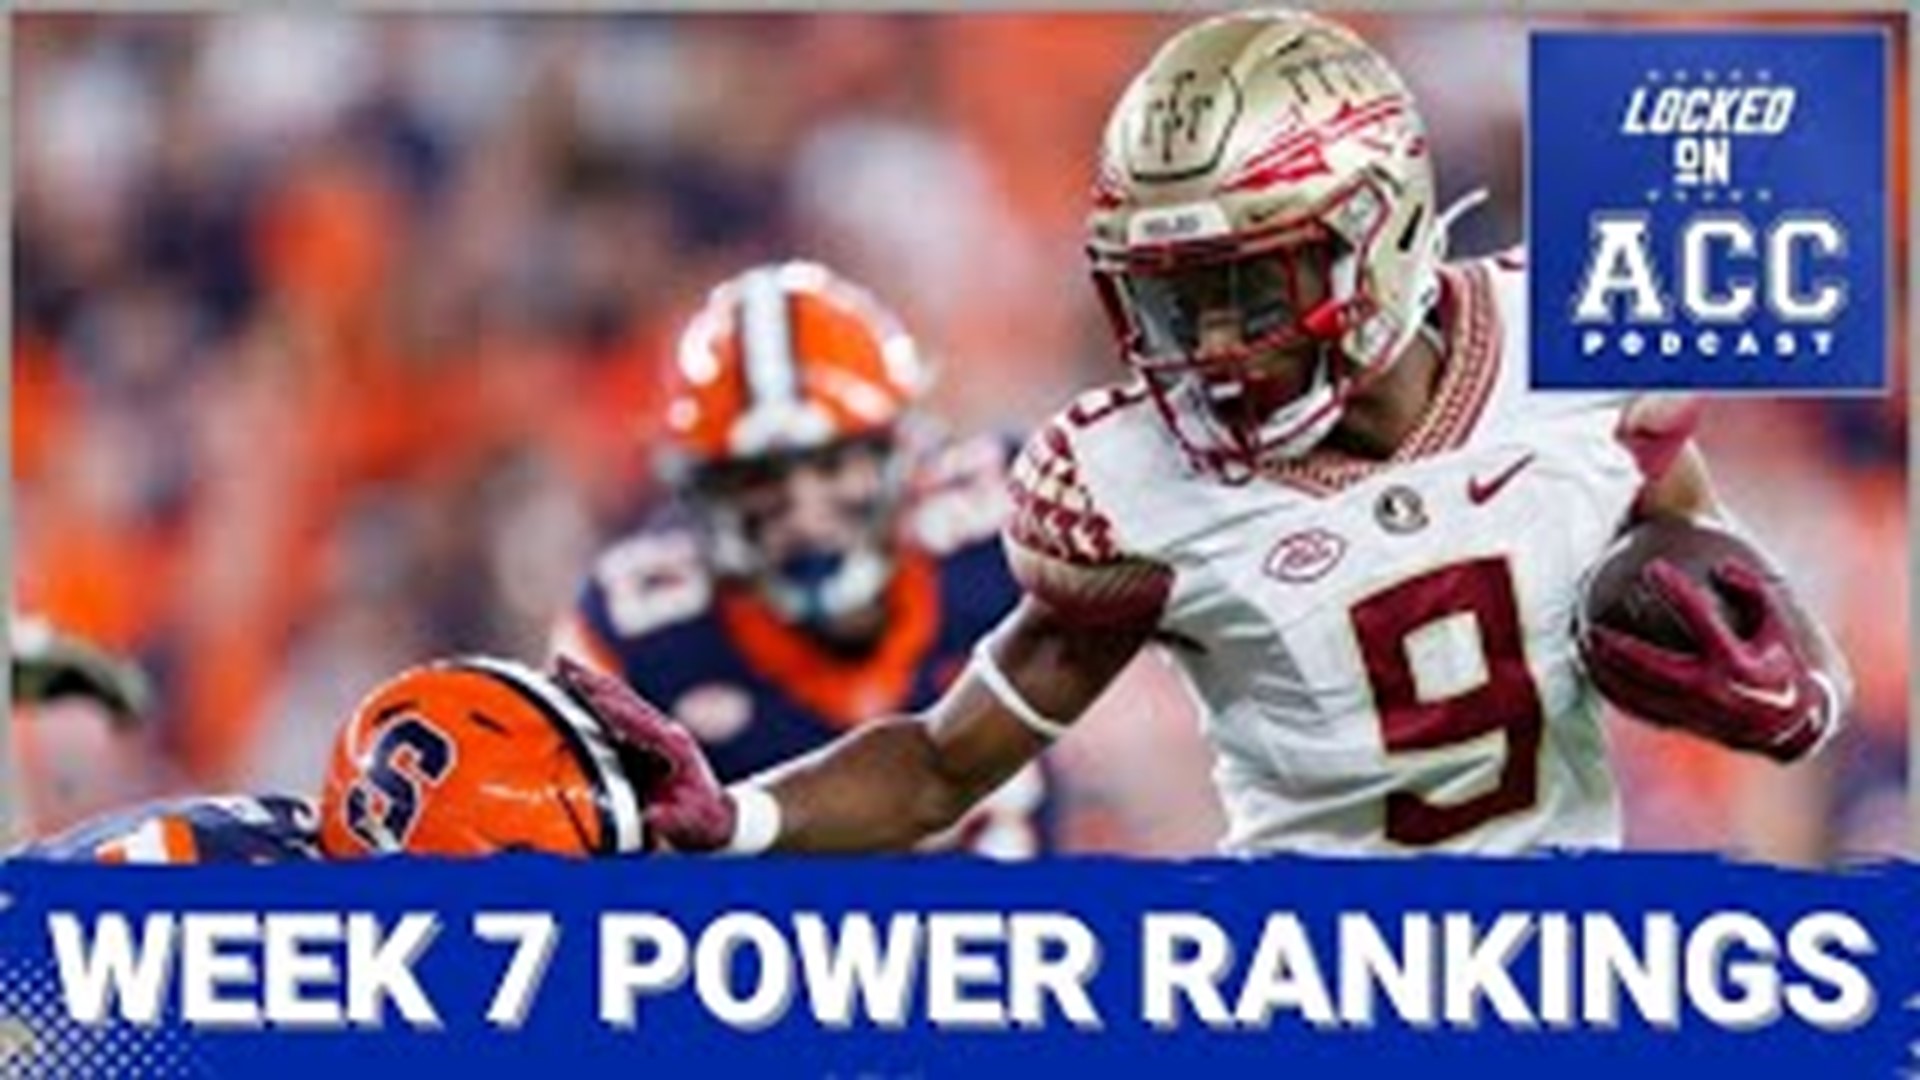 The ACC is pretty steady at the top 3 spots, but what about everyone else? Candace & Kenton talk Week 7 Power Rankings on today's episode.